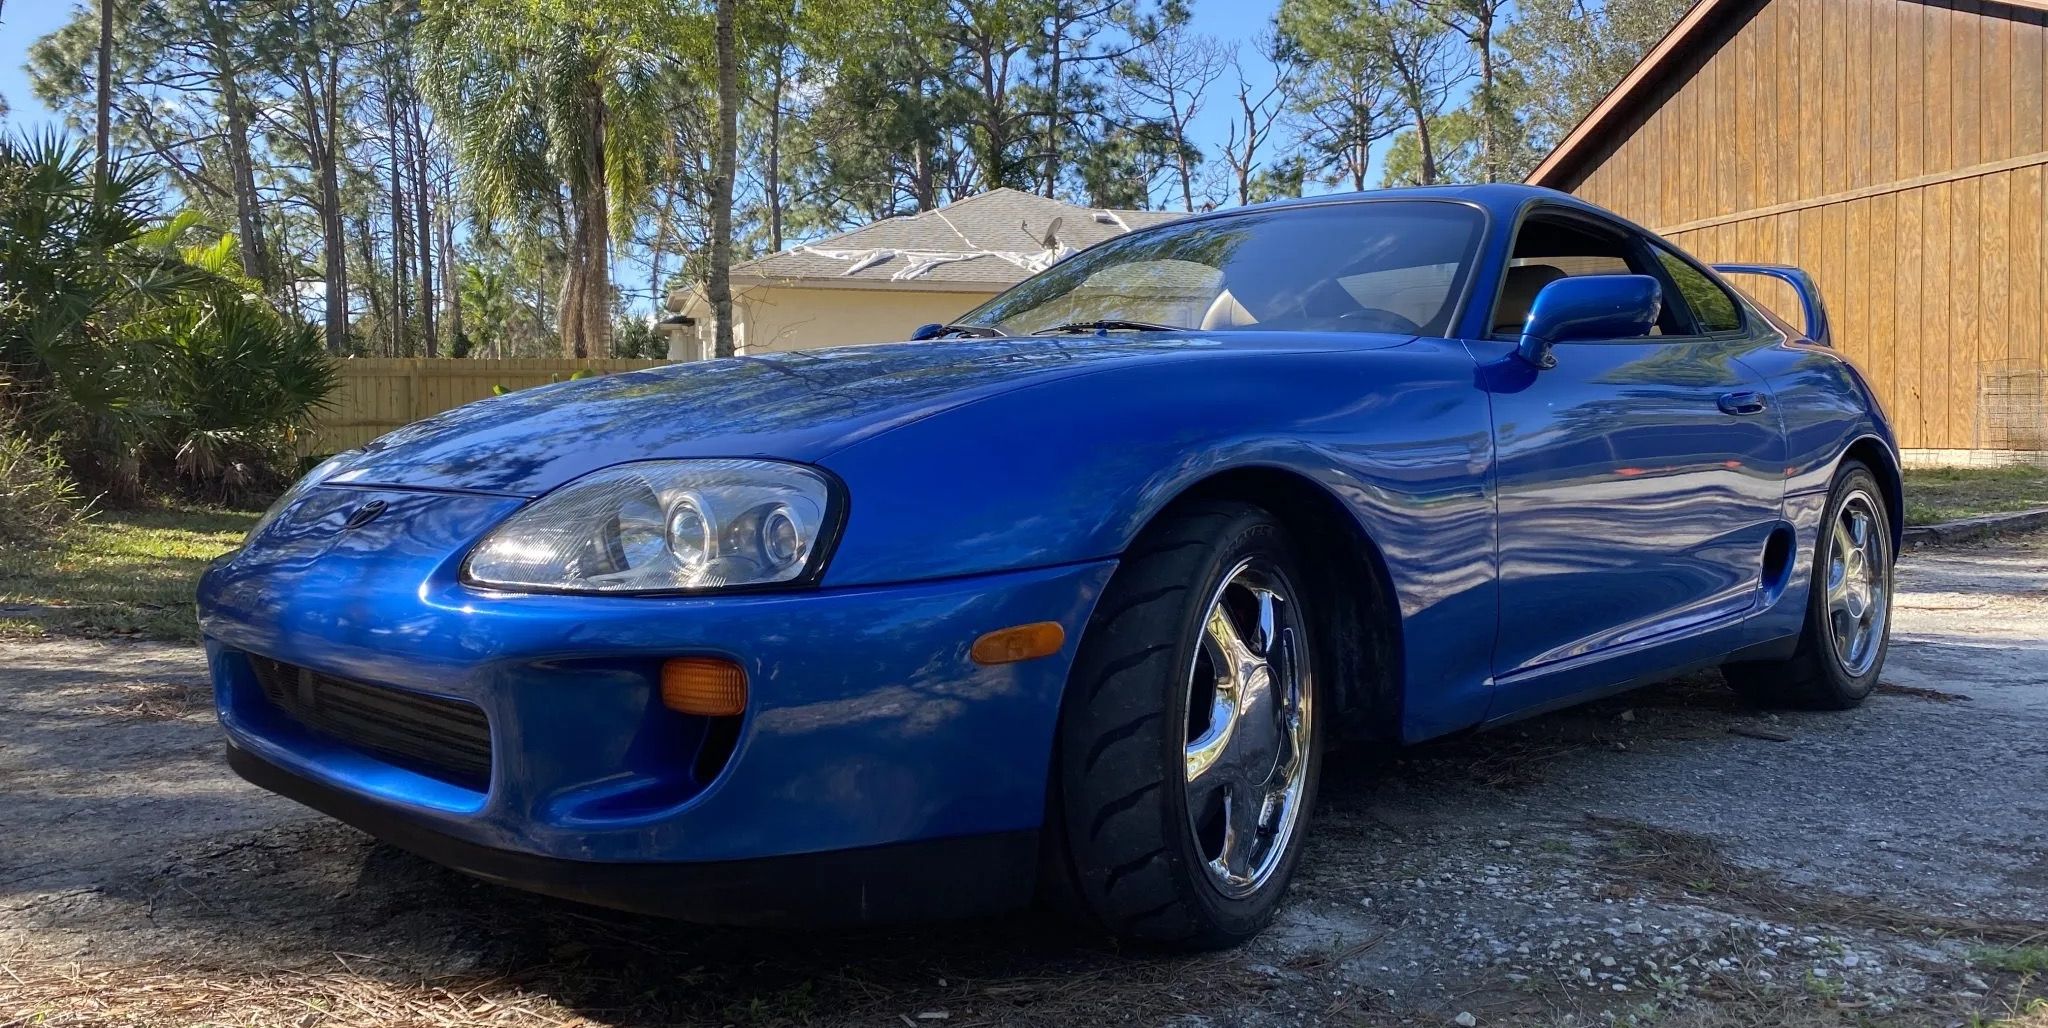 This Mk4 Toyota Supra Has 388,000 Miles On It and You Can Do the Next 388,000